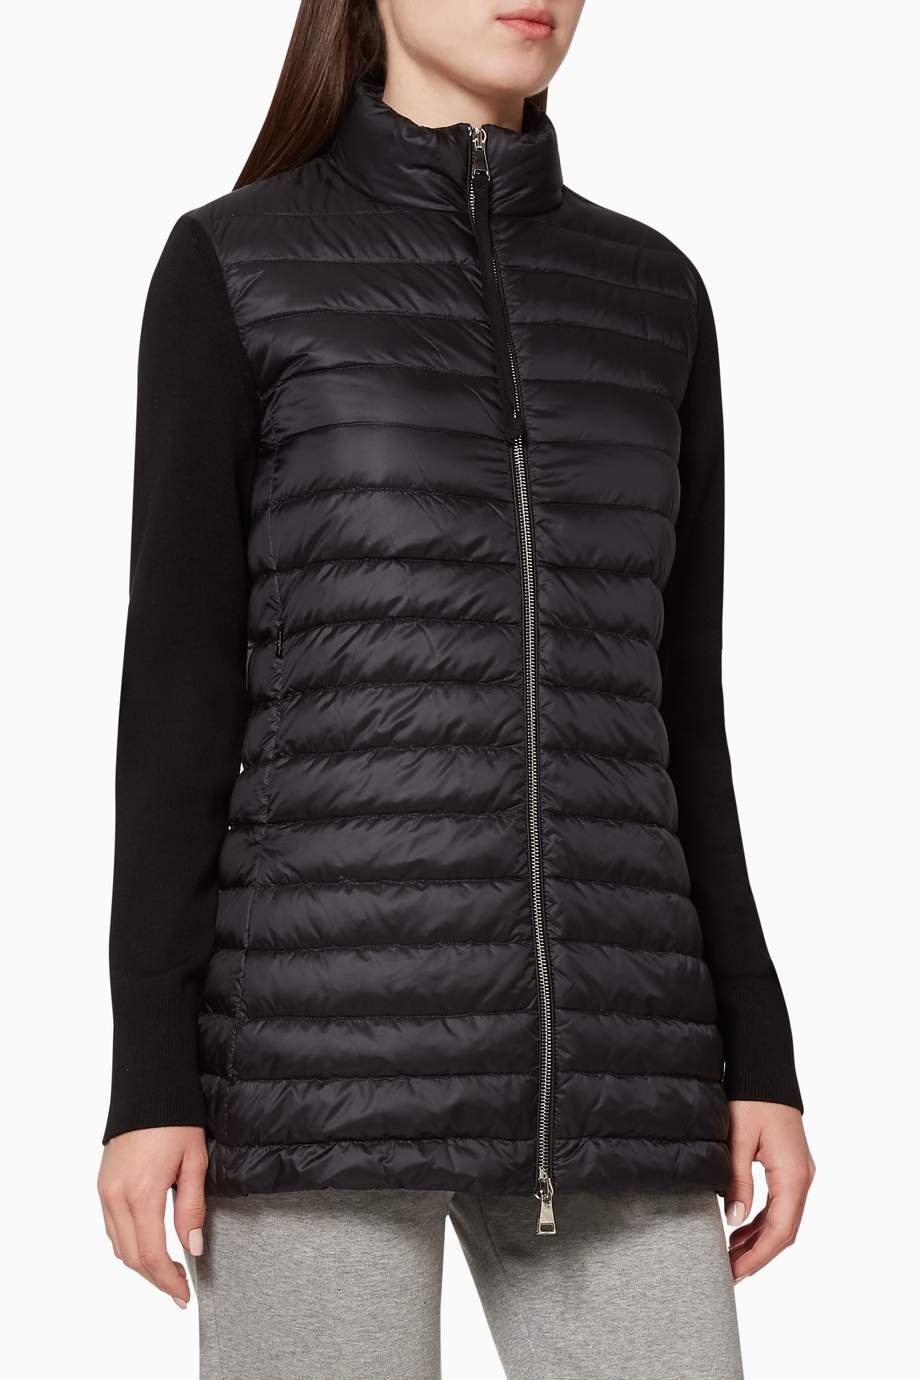 Shop Moncler Black Tricot Quilted Cardigan for Women | Ounass UAE